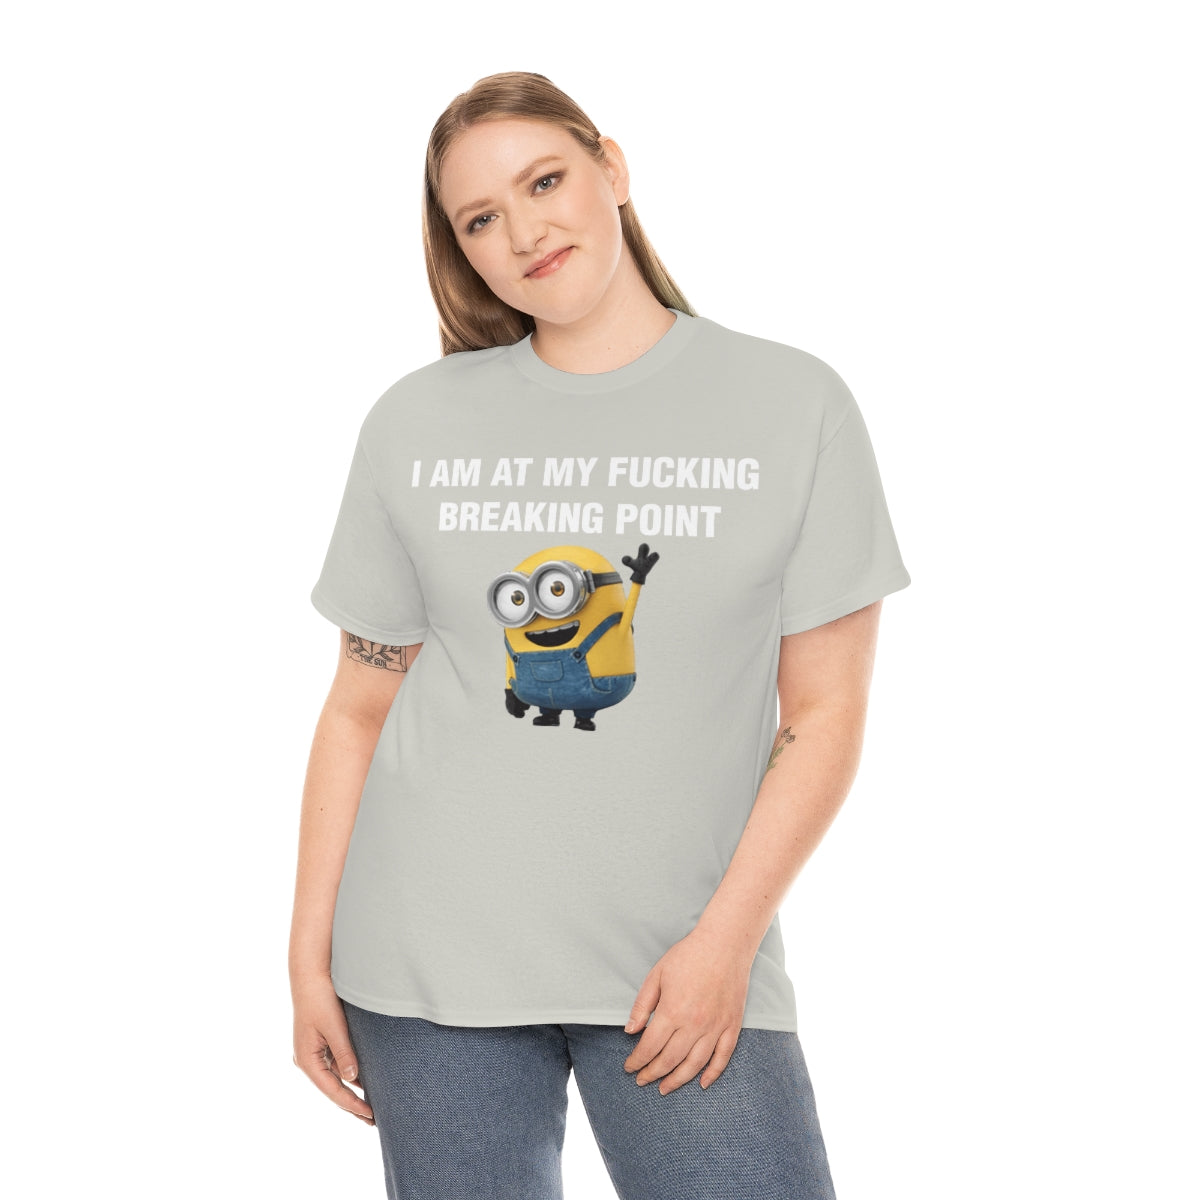 I AM AT MY FUCKING BREAKING POINT TEE